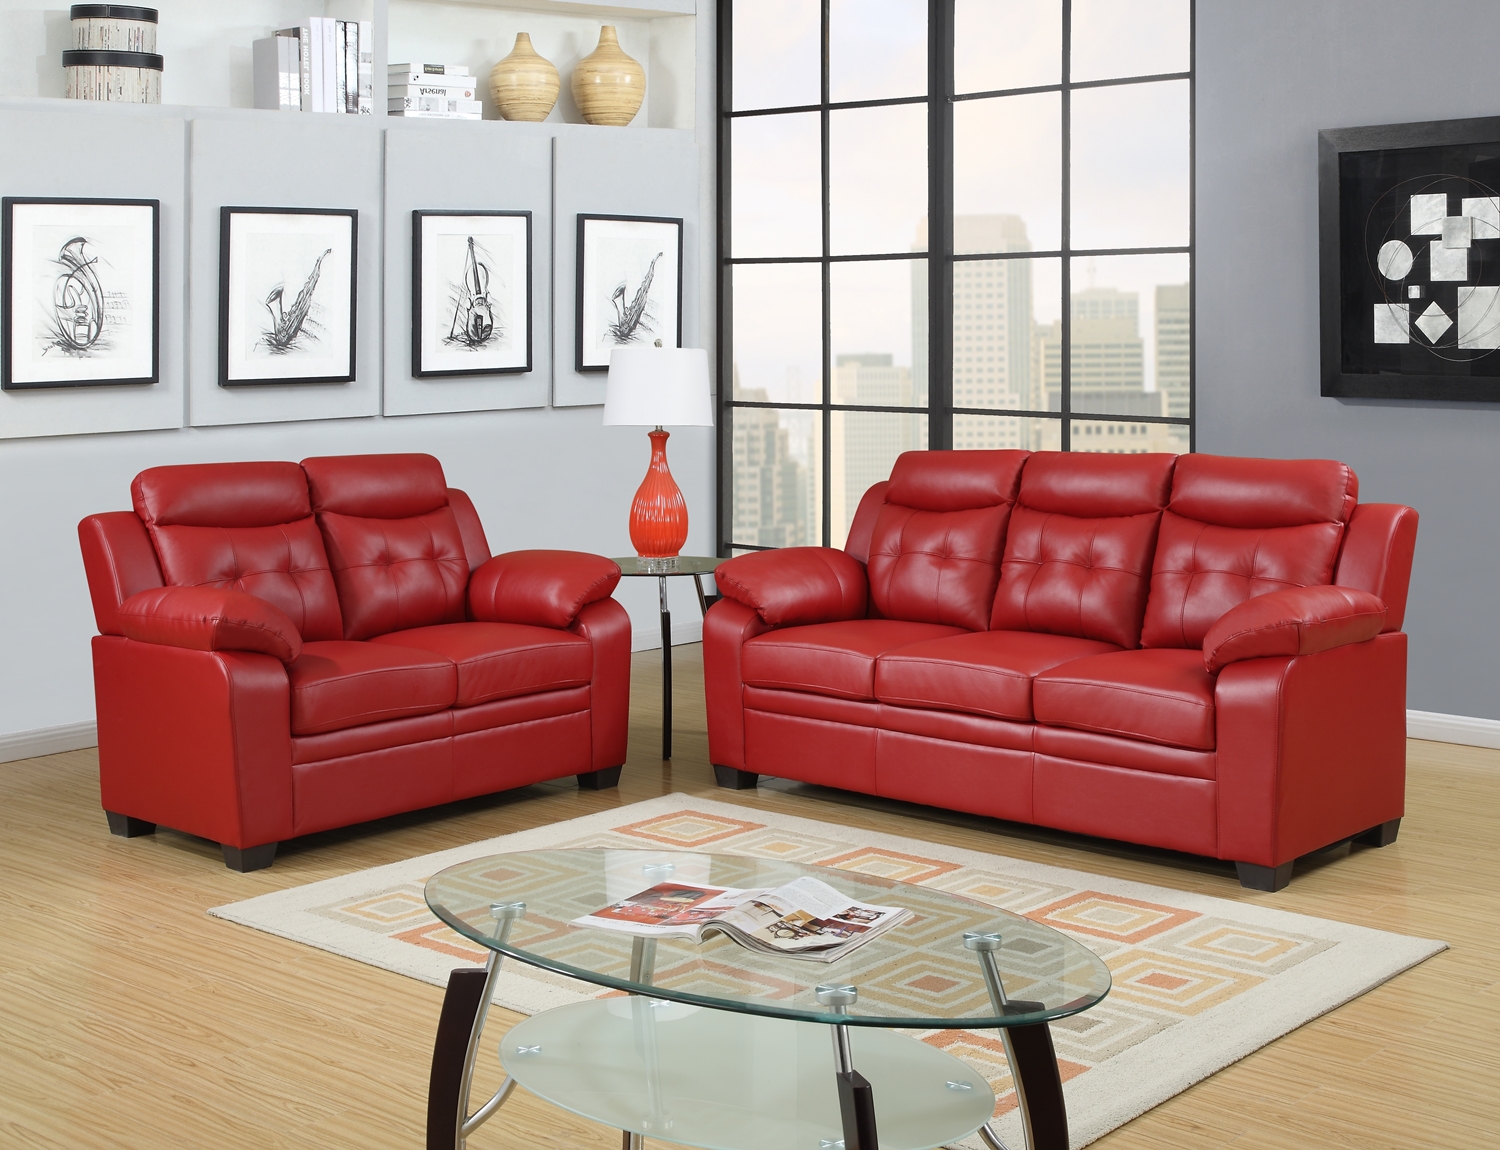 Best Red Apartment Sized Casual Contemporary Bonded Leather Living Room Sofa  Love red sofa set